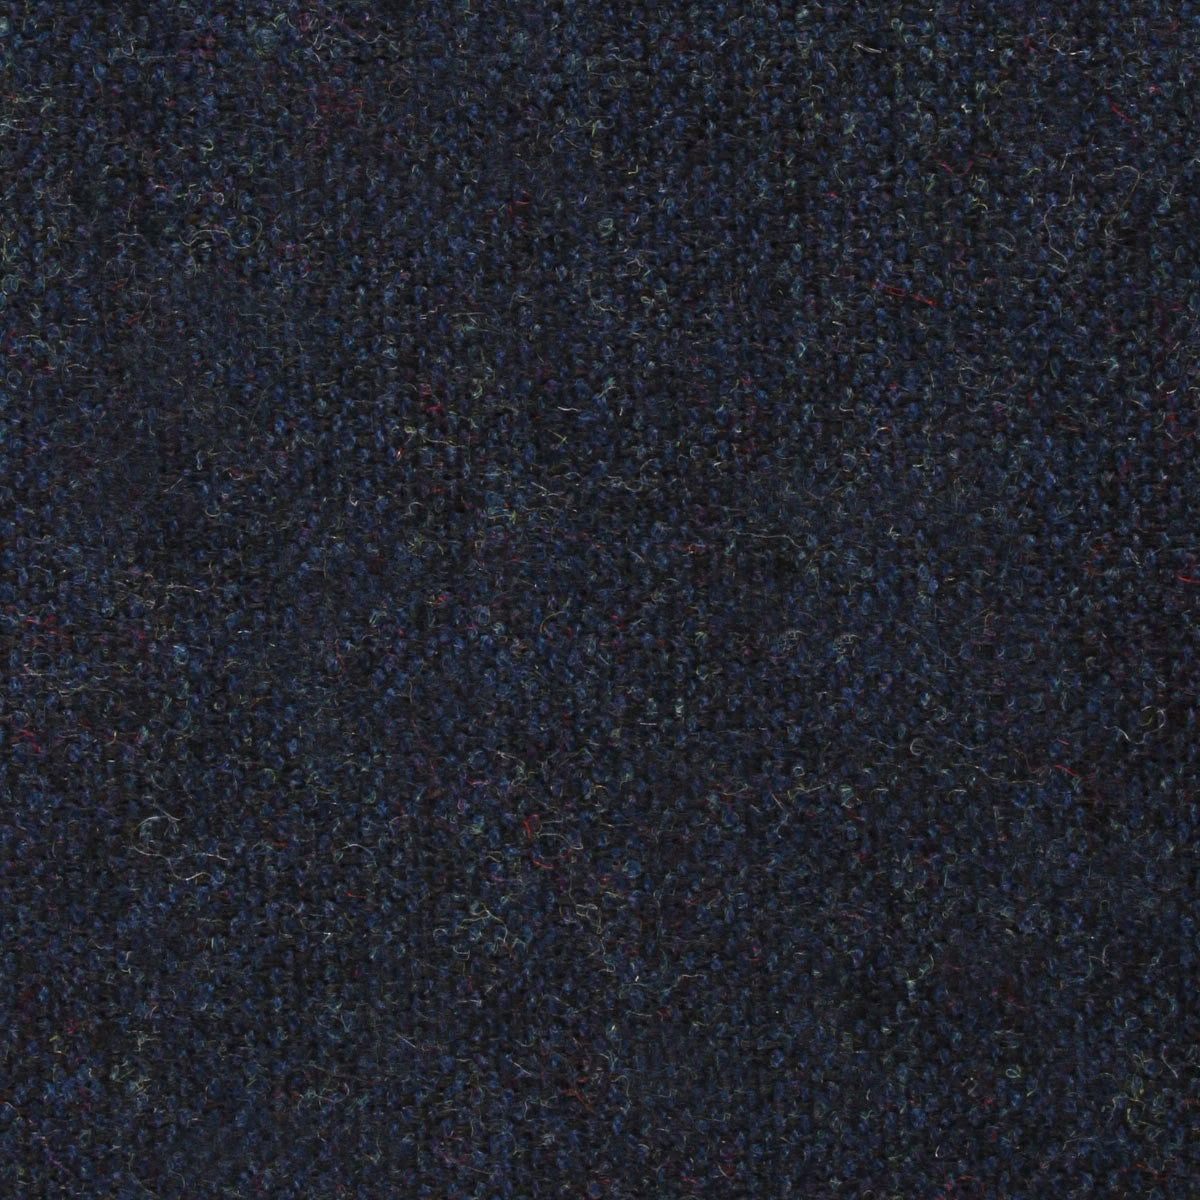 Deep Blue Cotswold Wool Fabric Pocket Square